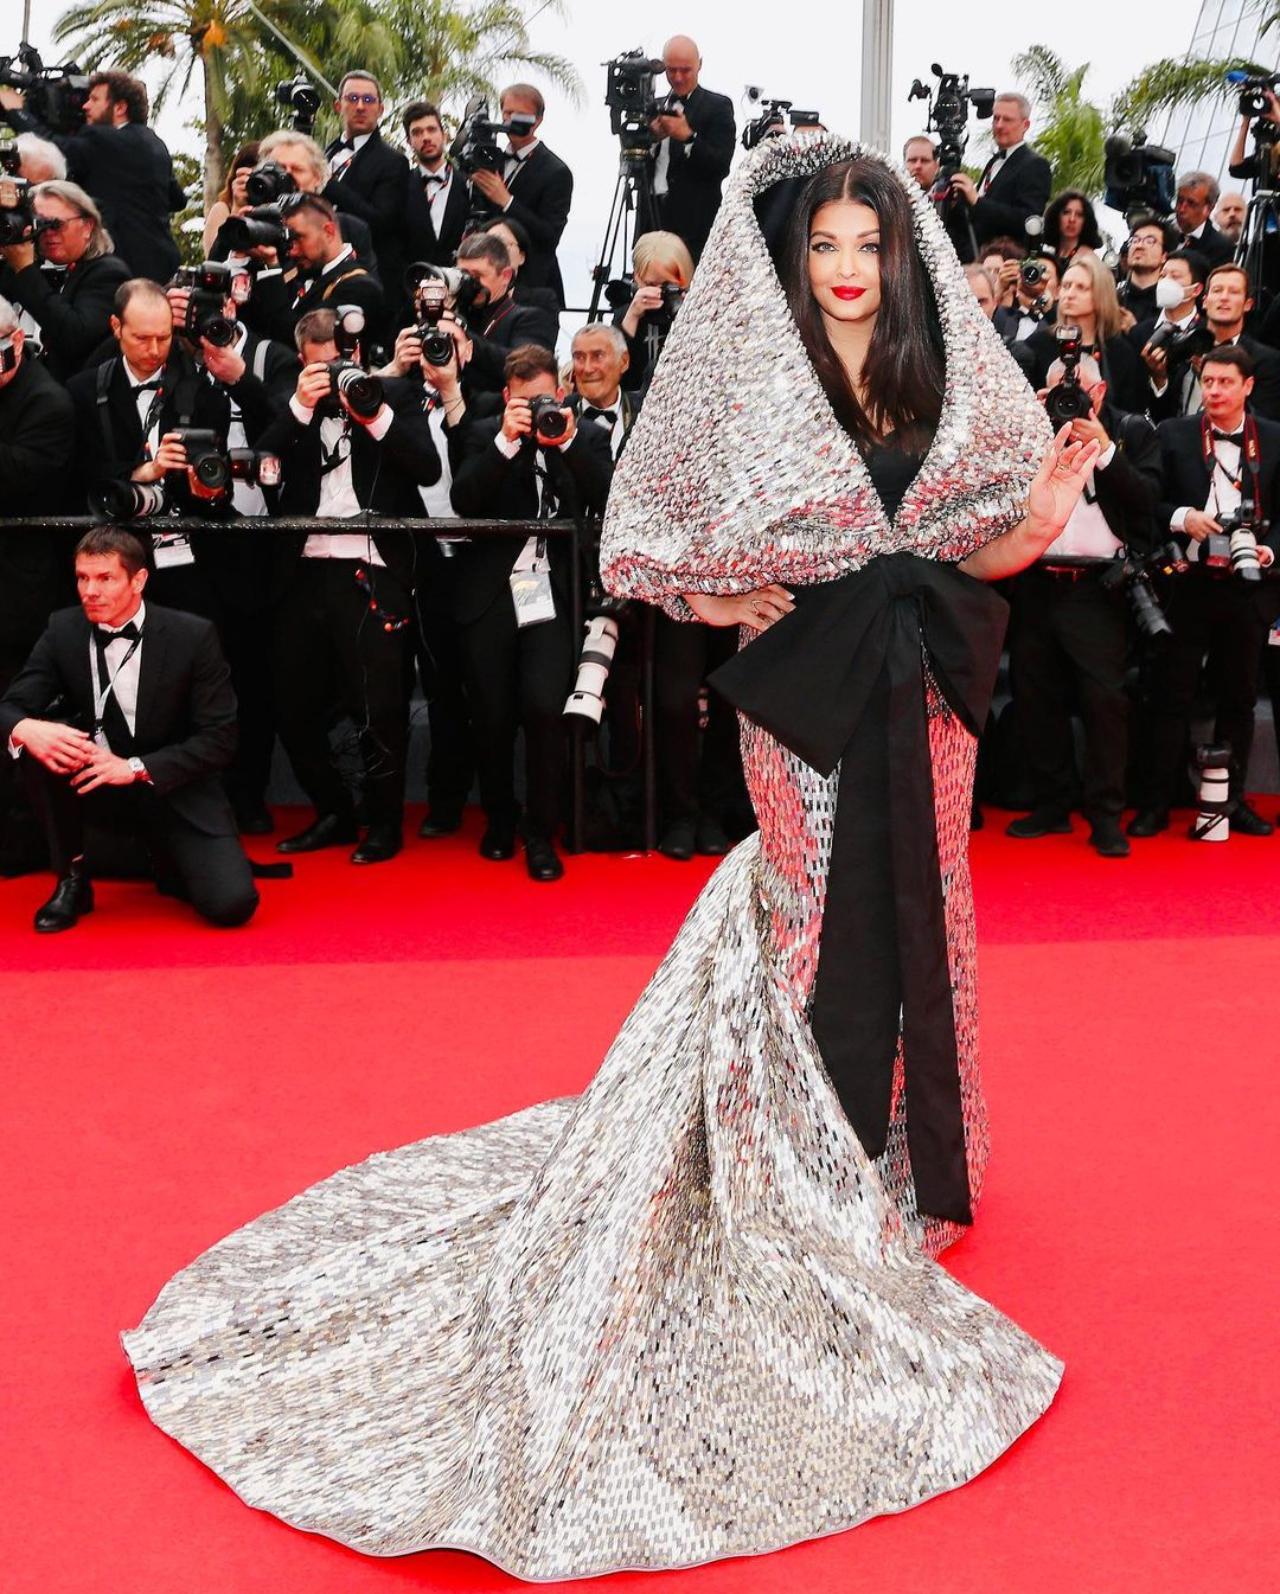 The Cannes veteran Aishwarya Rai Bachchan dressed herself in a black and silver hooded gown from the collections of Sophie Couture for her appearance at the festival this year. Read full story here 